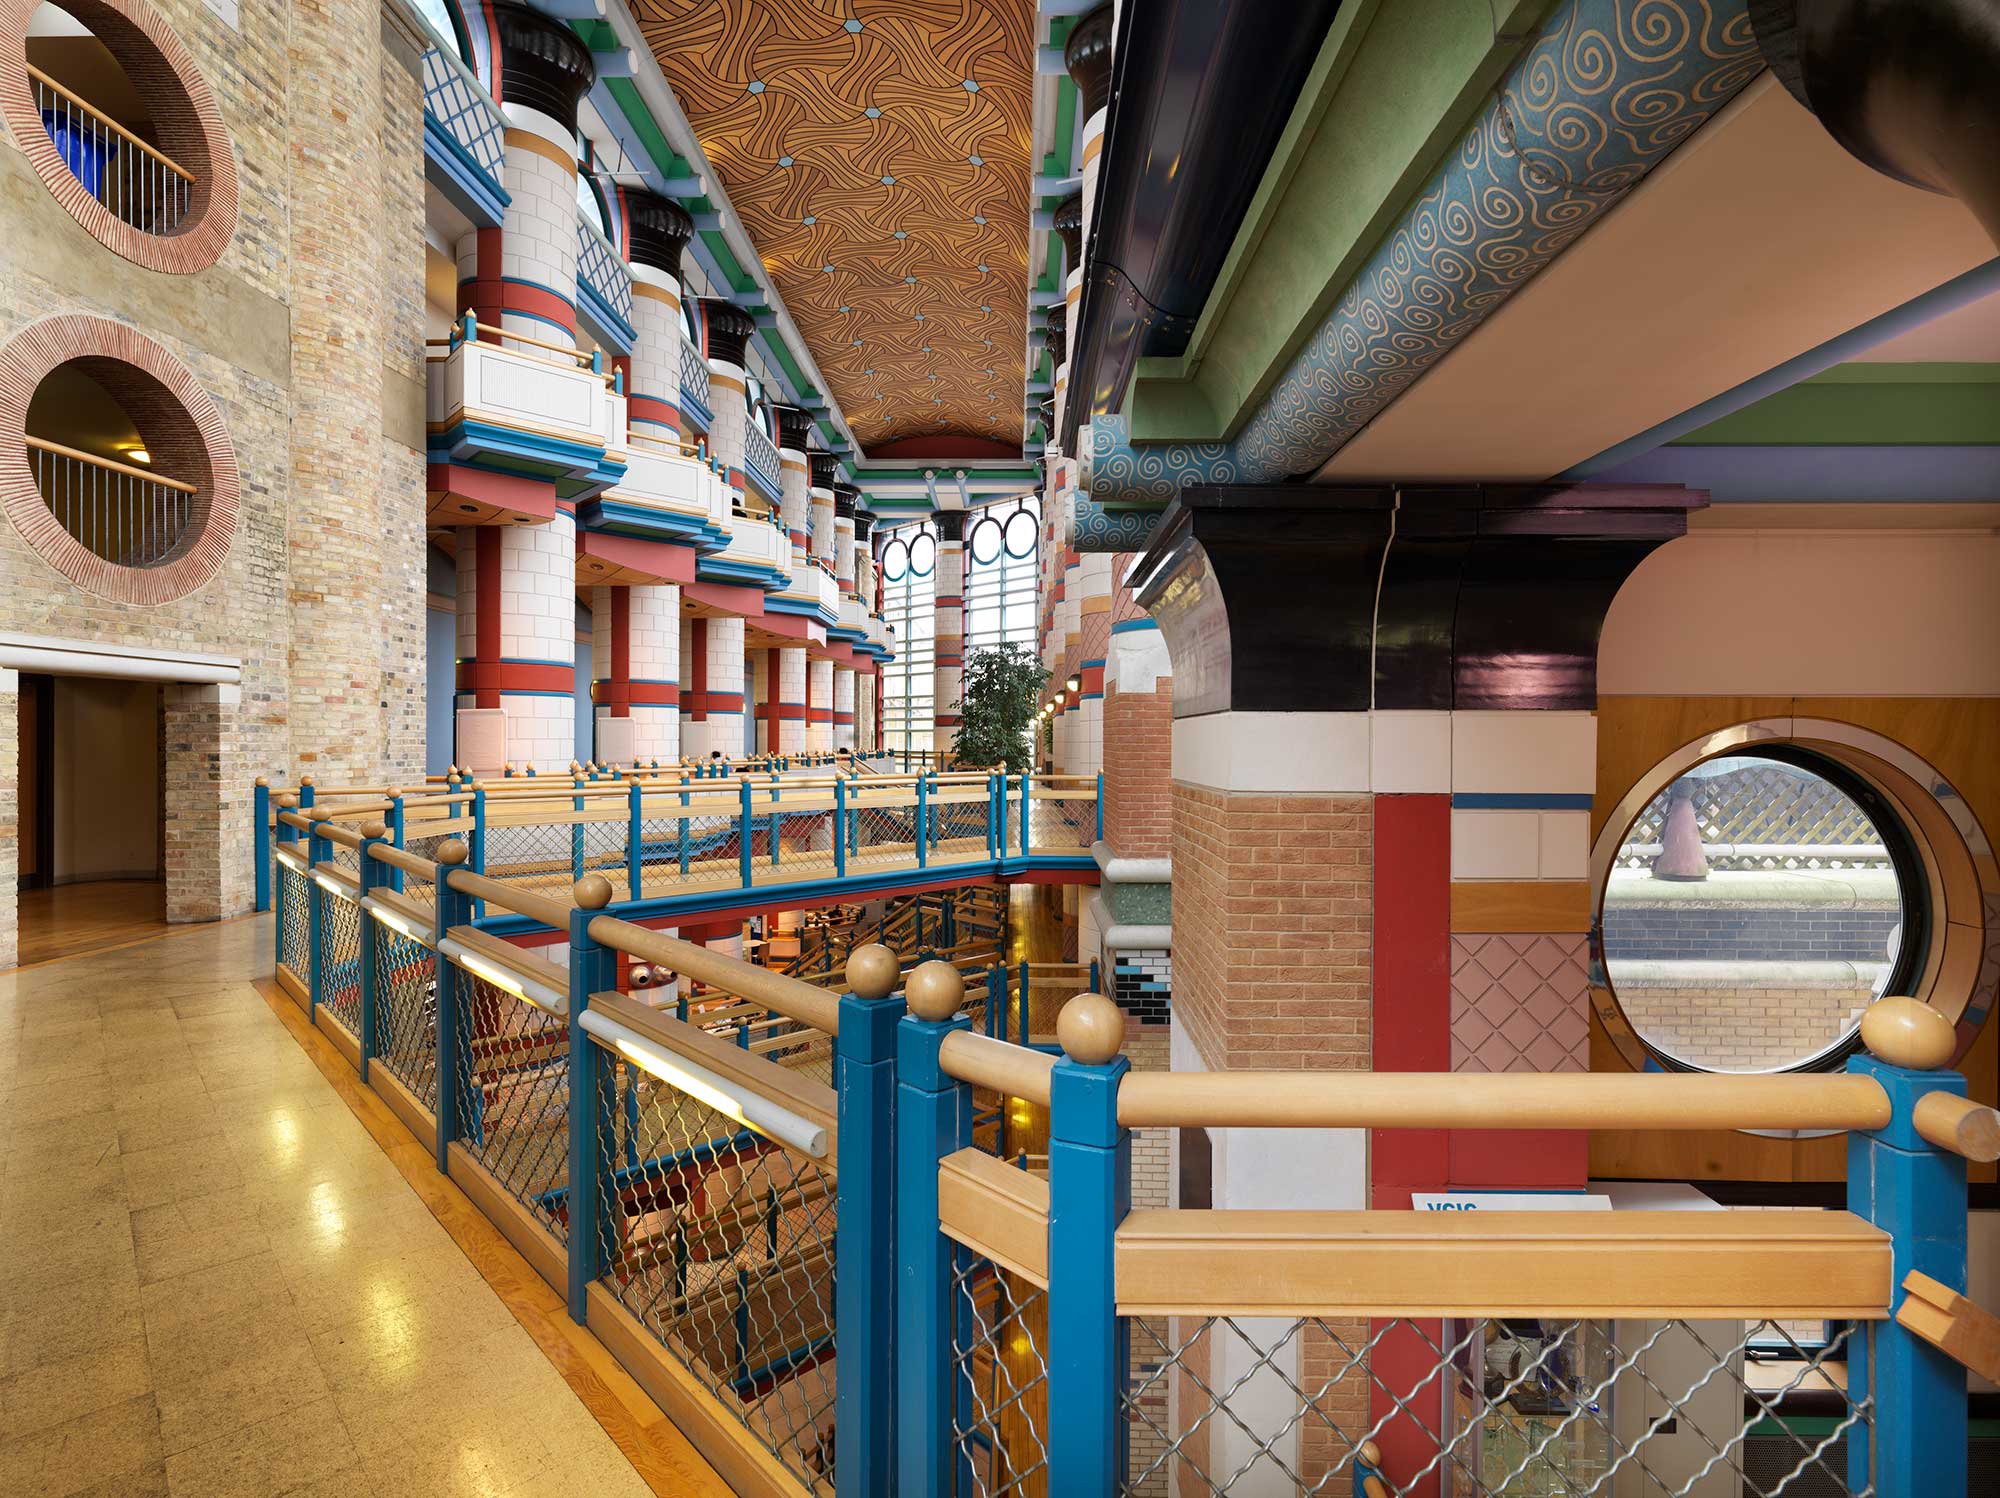 Modern interior with pillars and brickwork painted in bright colours